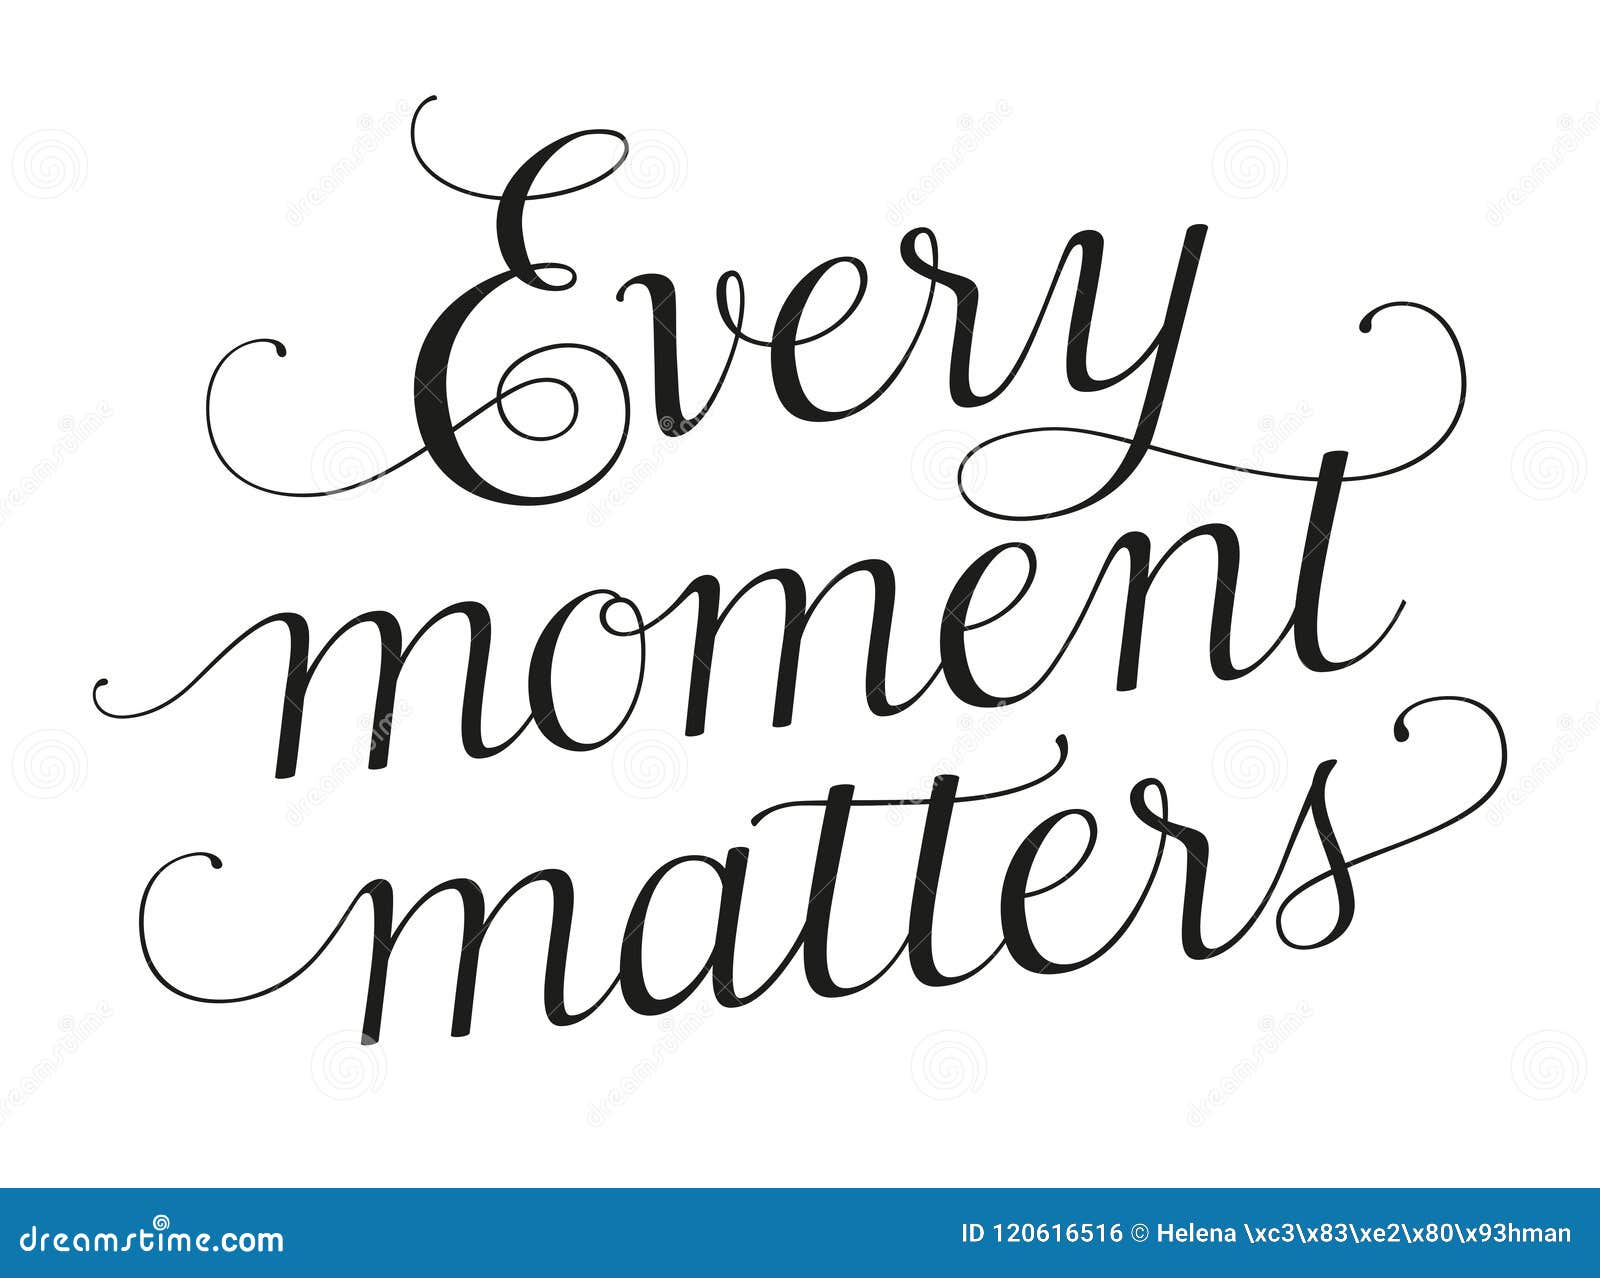 every moment matters